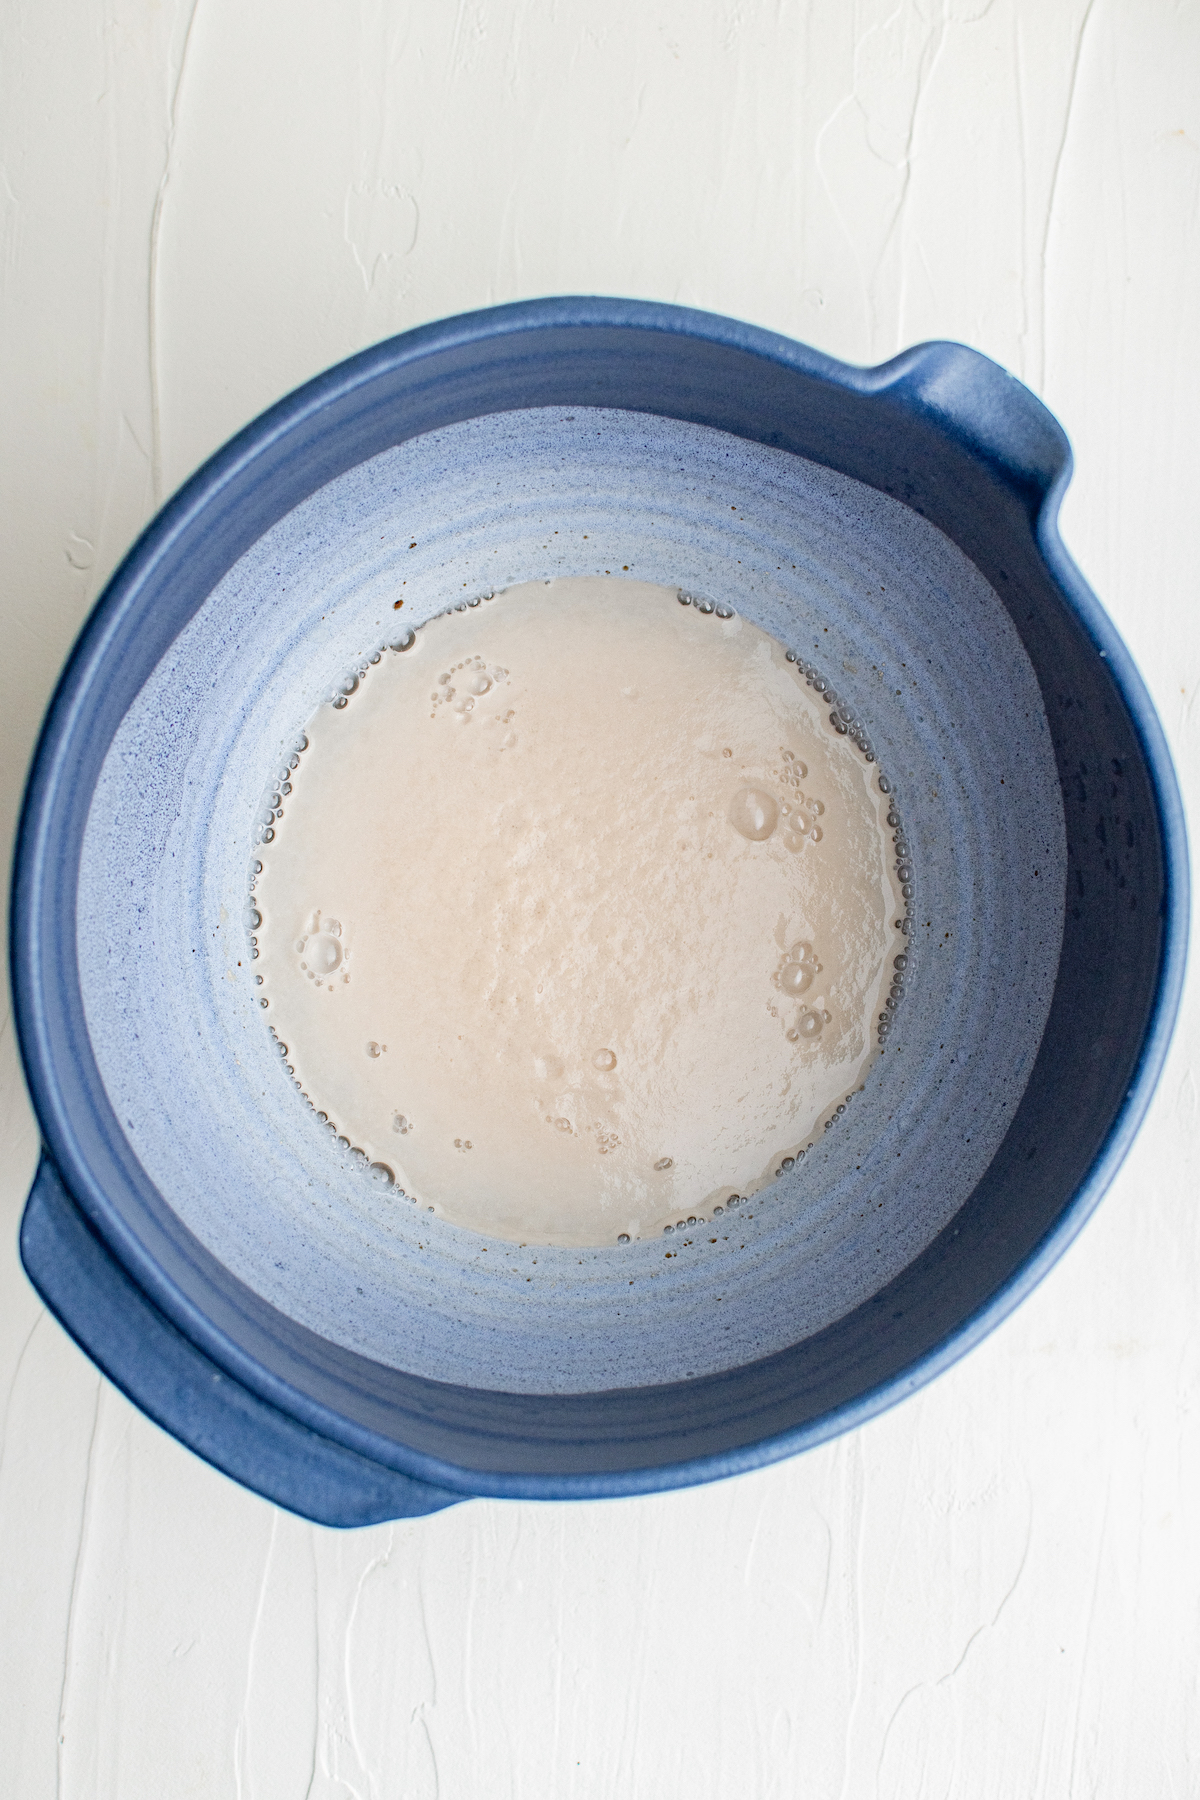 Yeast proofing in a bowl with warm water and sugar.